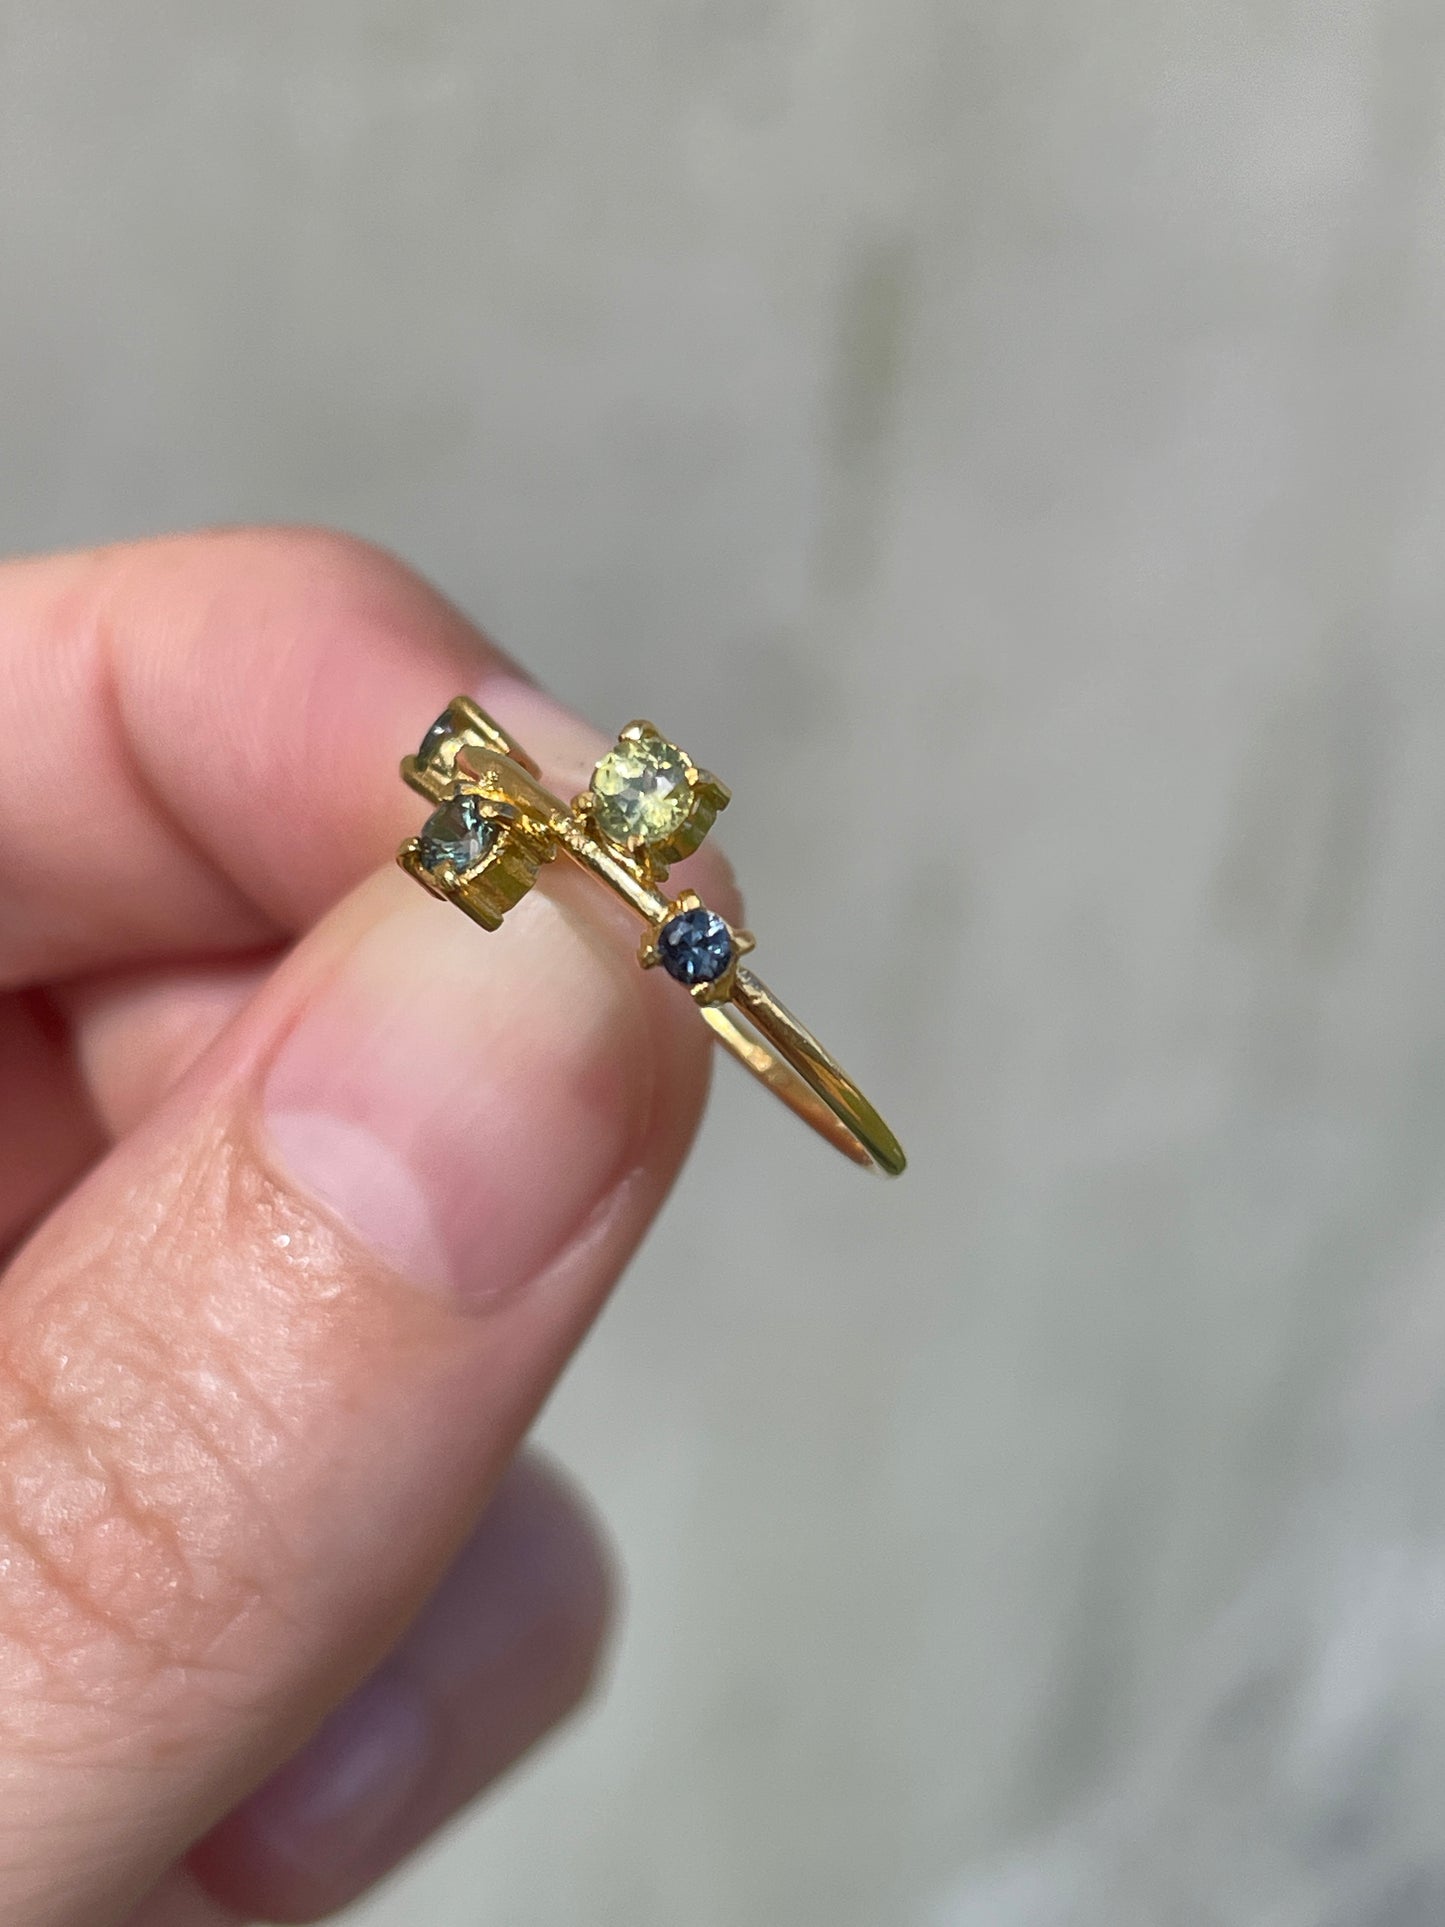 Galaxy Ring Gold with Tropical Green Sapphires and Tourmalines - size 7